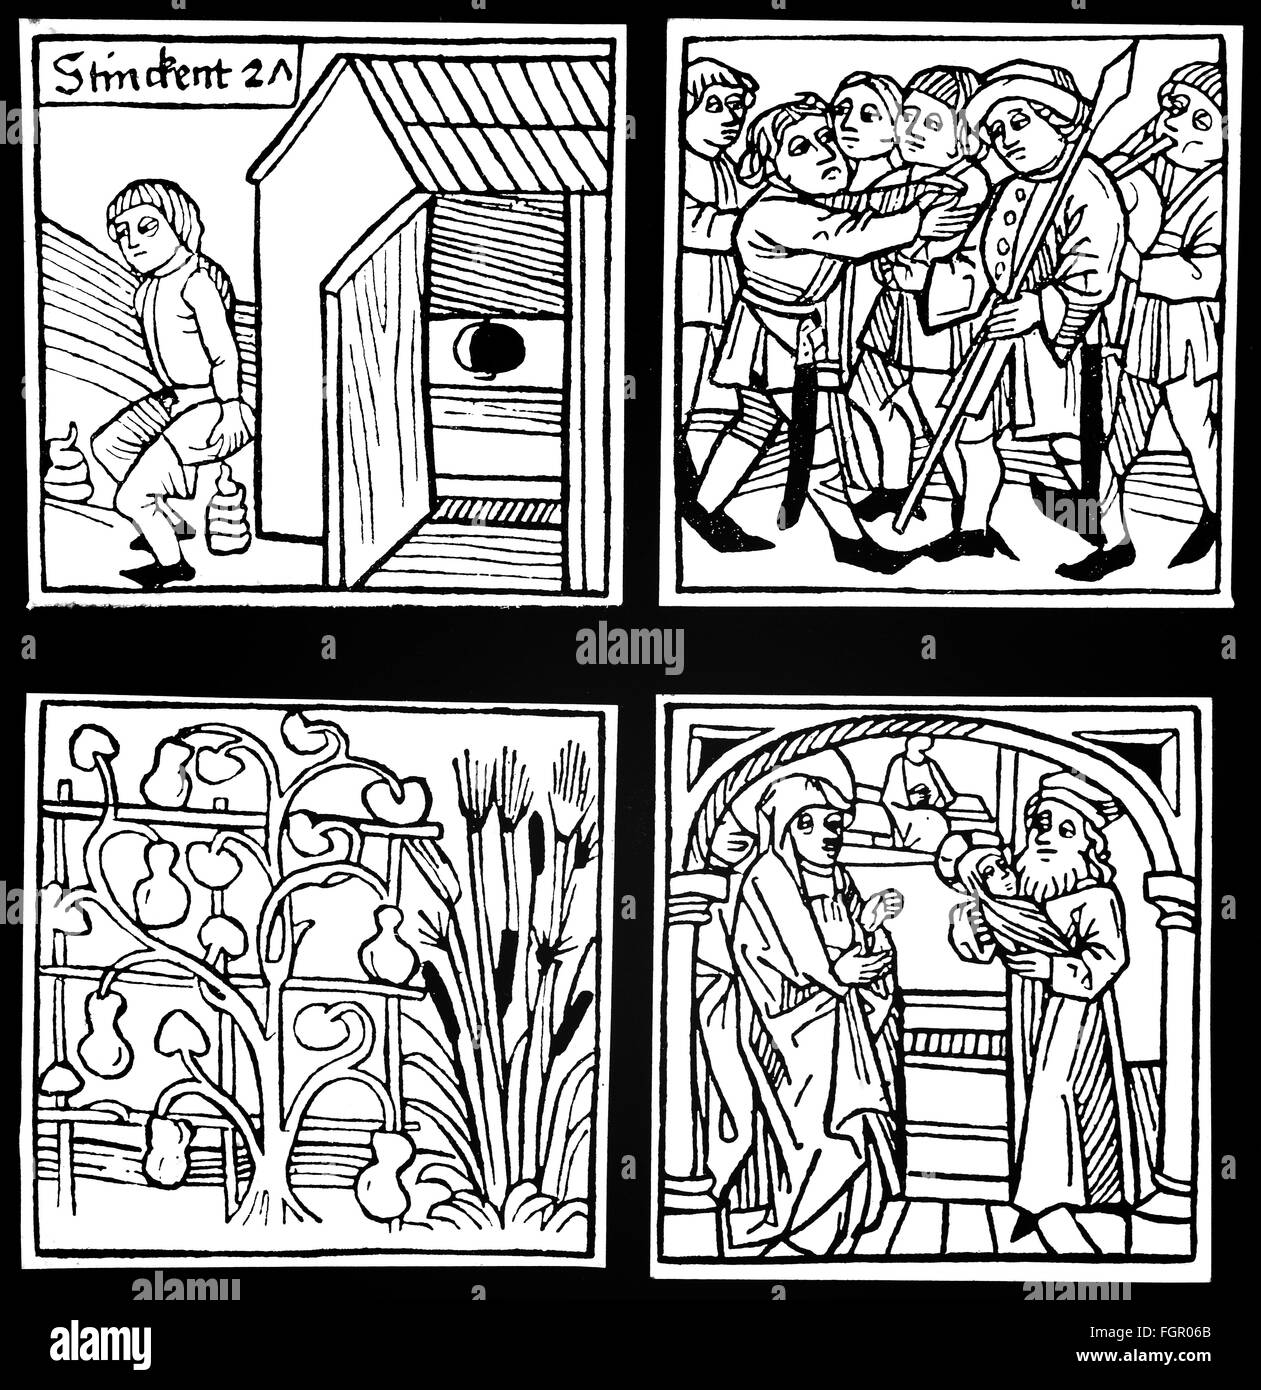 literature, Middle Ages, allegories of 'stench', 'rudeness', 'growth', 'life', woodcut, from: 'Ars memorativa' by Jakobus Publicius, printed by Anton Sorg (1430 - 1493), Augsburg, Germany, circa 1490, private collection, Additional-Rights-Clearences-Not Available Stock Photo